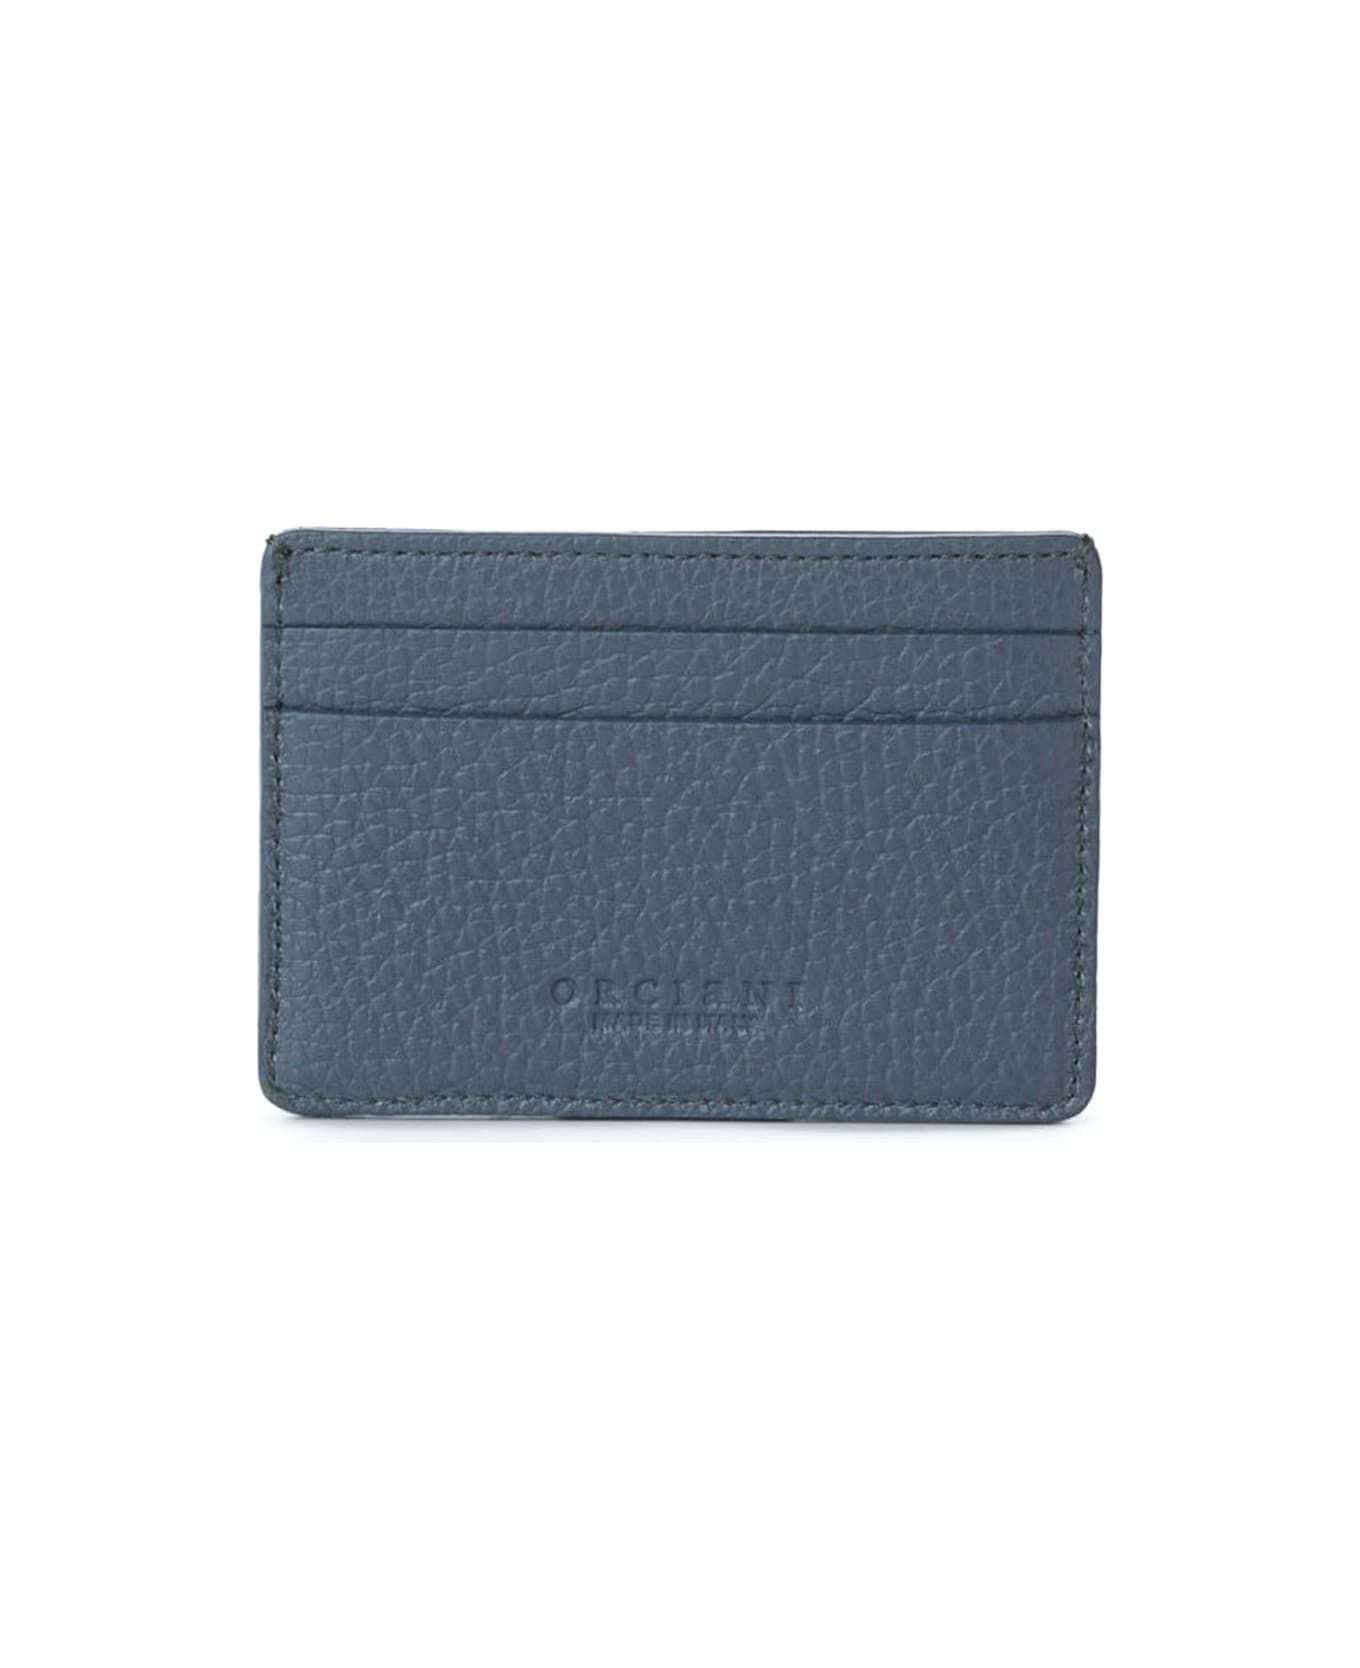 Orciani Micron Leather Card Holder - Blue バッグ